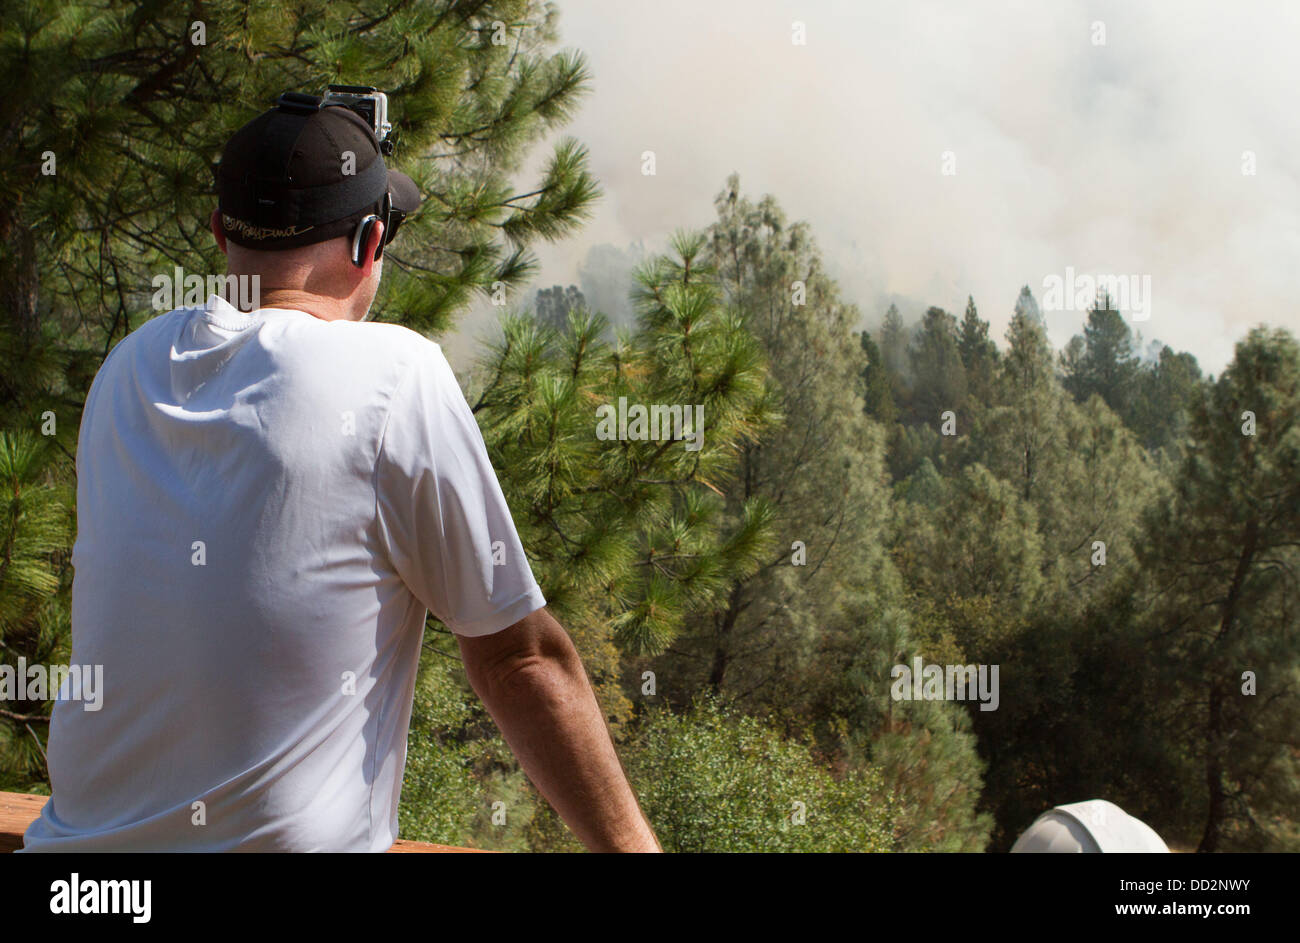 Buck Meadows, CA, USA. 23rd Aug, 2013. Ken Canobbio watches from his deck as smoke and flames get closer to his Pine Mountain Lake, CA home home on Cliffton Way. The Rim Fire in the Stanislaus National Forest along Highway 120 continues to grow. According to the US Forest Service as of Friday Aug. 23rd 2013 afternoon the fire has grown to 125,620 acres with only 5% containment with more evacuations in Tuolumne City, CA and nearby areas along the Highway 108 corridor. The fire continues to spread in several directions including towards Yosemite National Park. (Credit Image: © Marty Bicek/ZUM Stock Photo